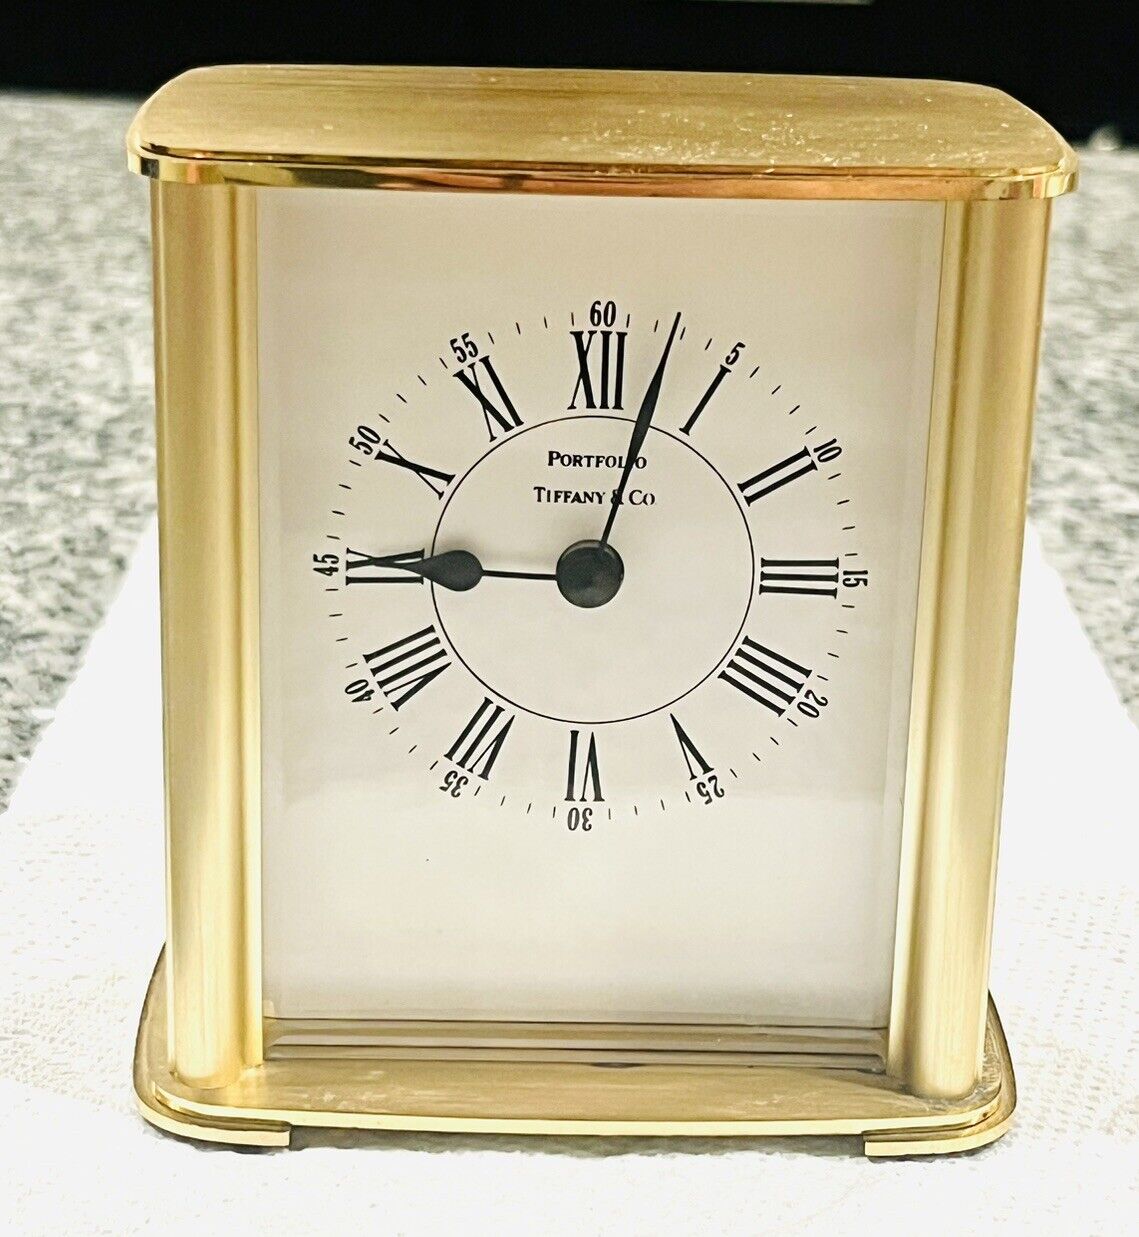 Portfolio by Tiffany & Co. Brass 90s Award Table Desk Clock German Made Tested